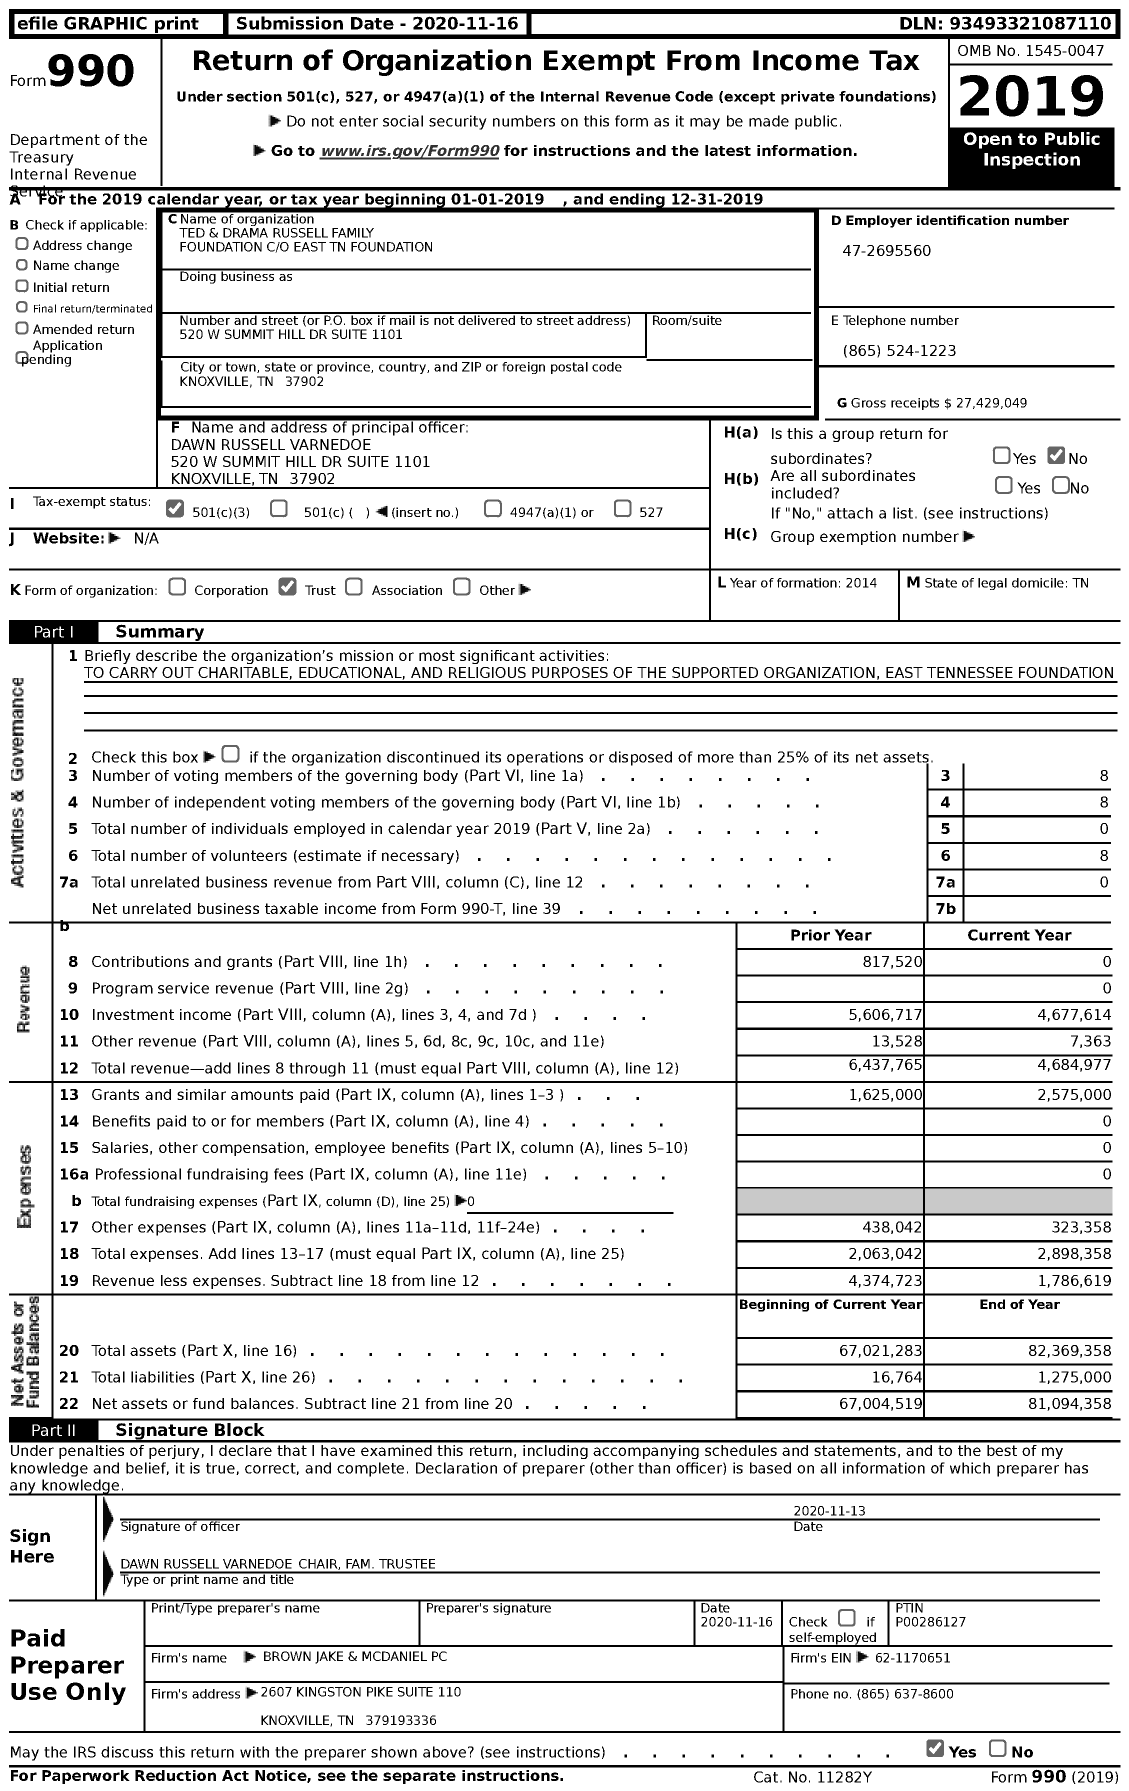 Image of first page of 2019 Form 990 for Ted and Drama Russell Family Foundation